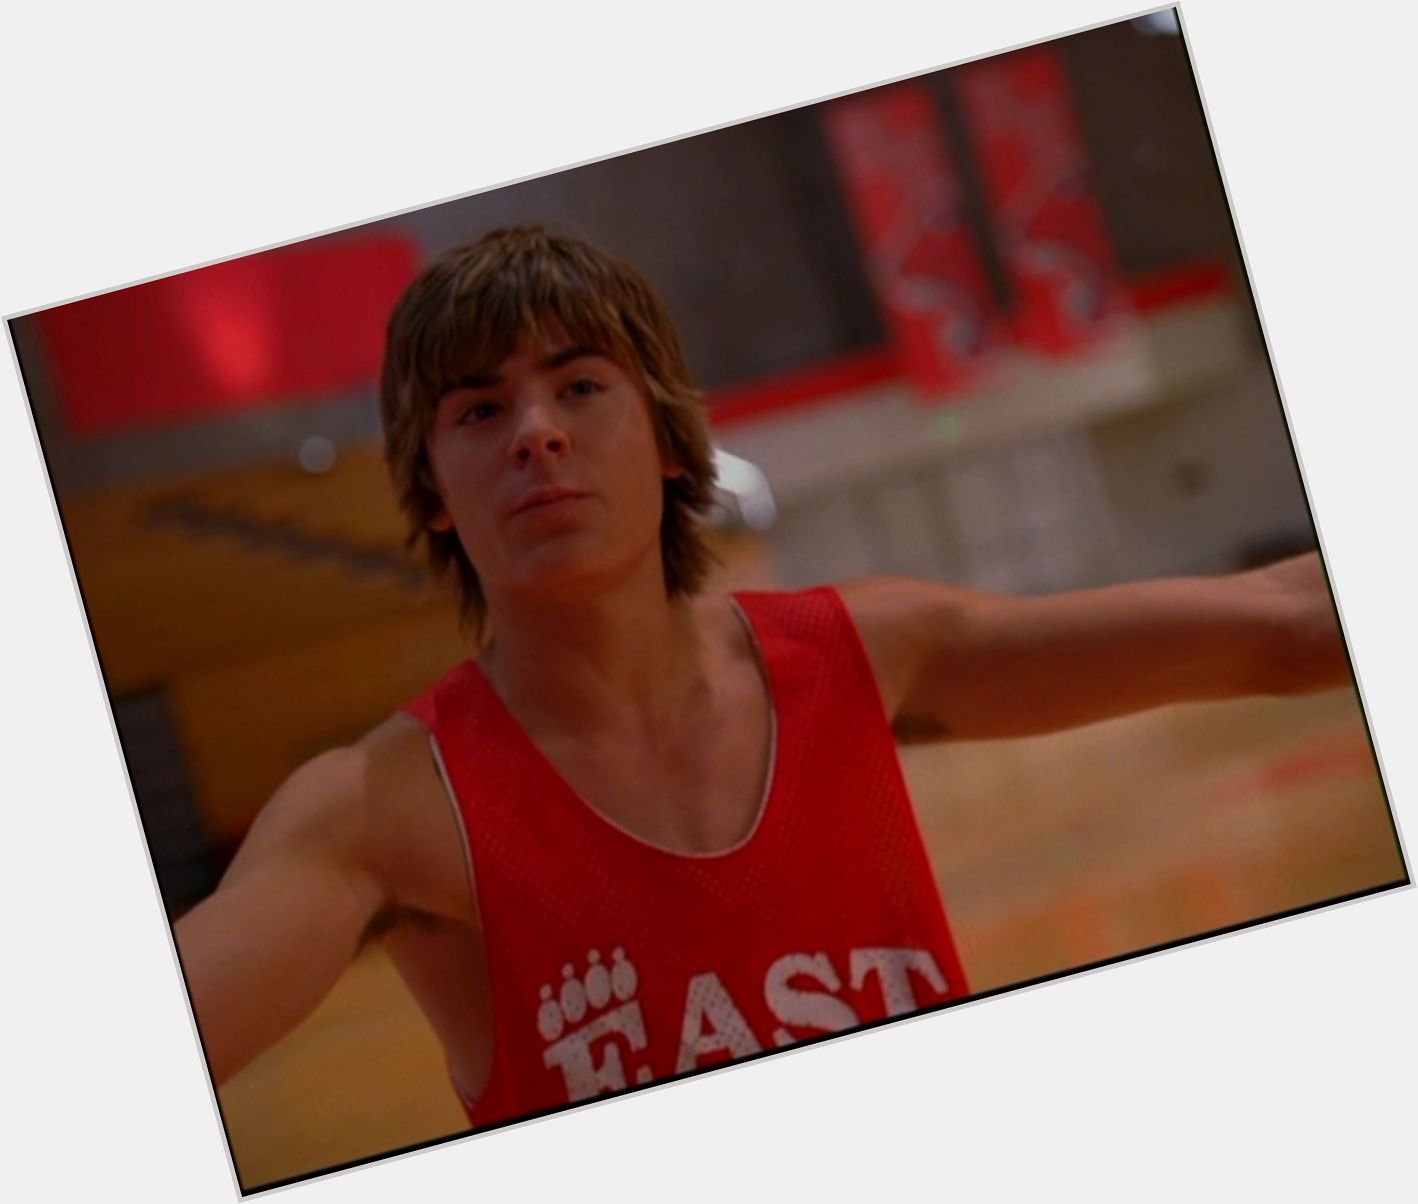 Troy Bolton light brown hair & hairstyles Athletic body, 